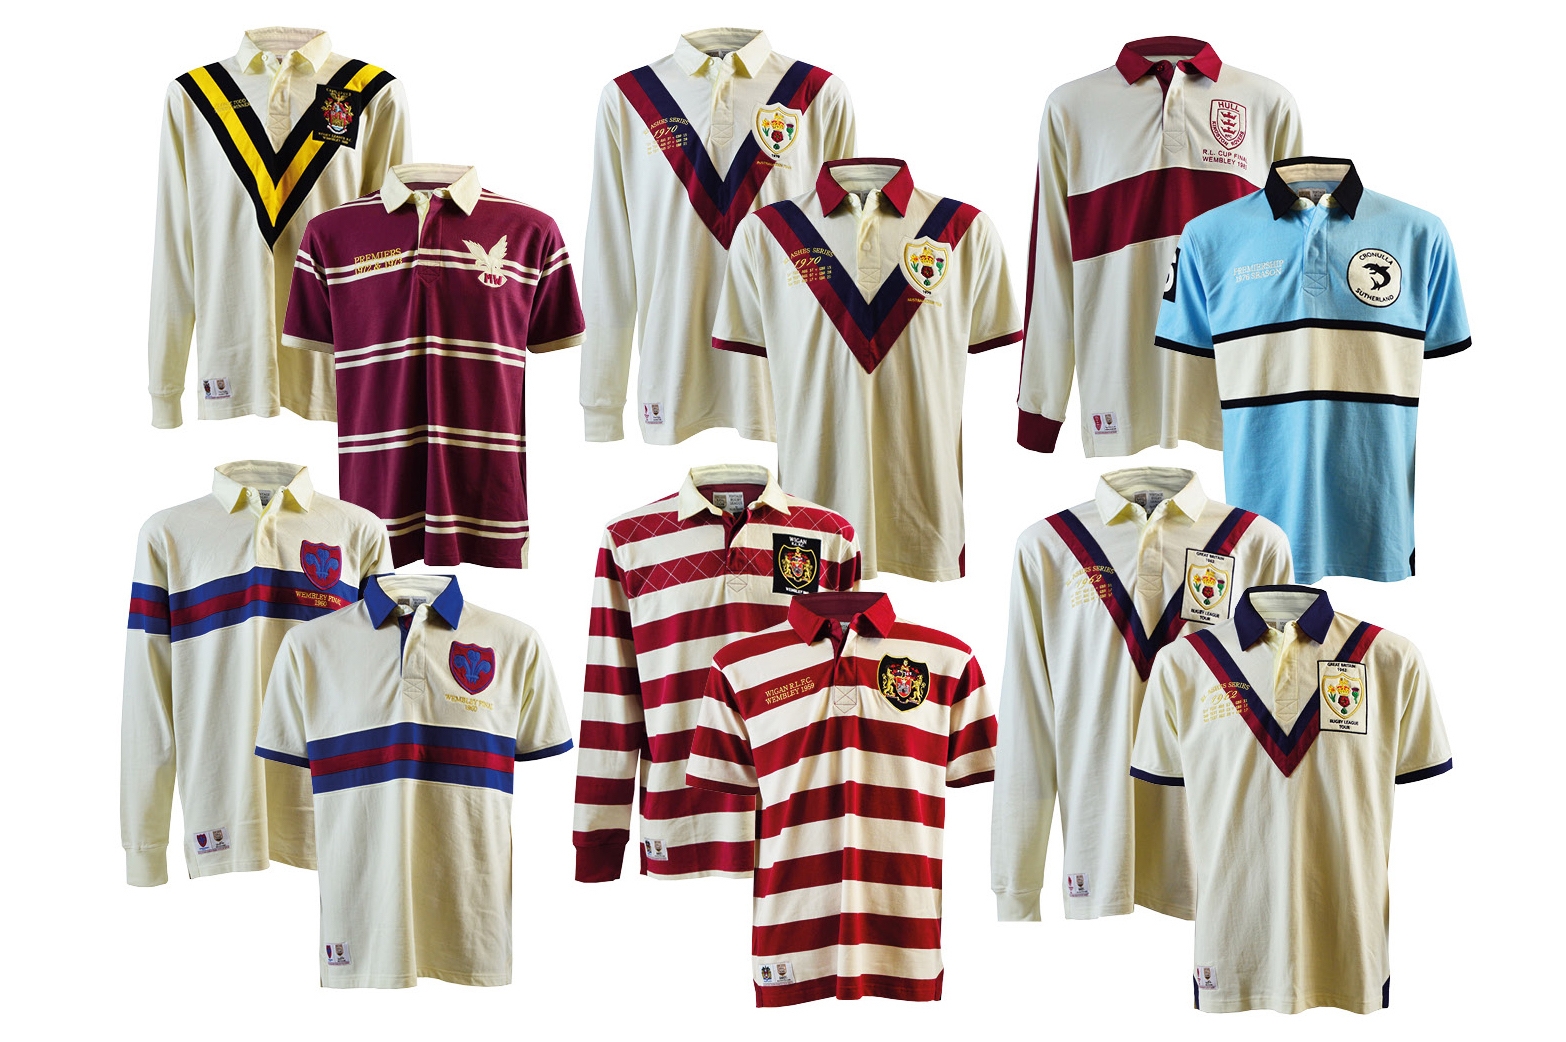 Heritage Mens Neil Fox Hall of Fame Wakefield Rugby League Shirt White 